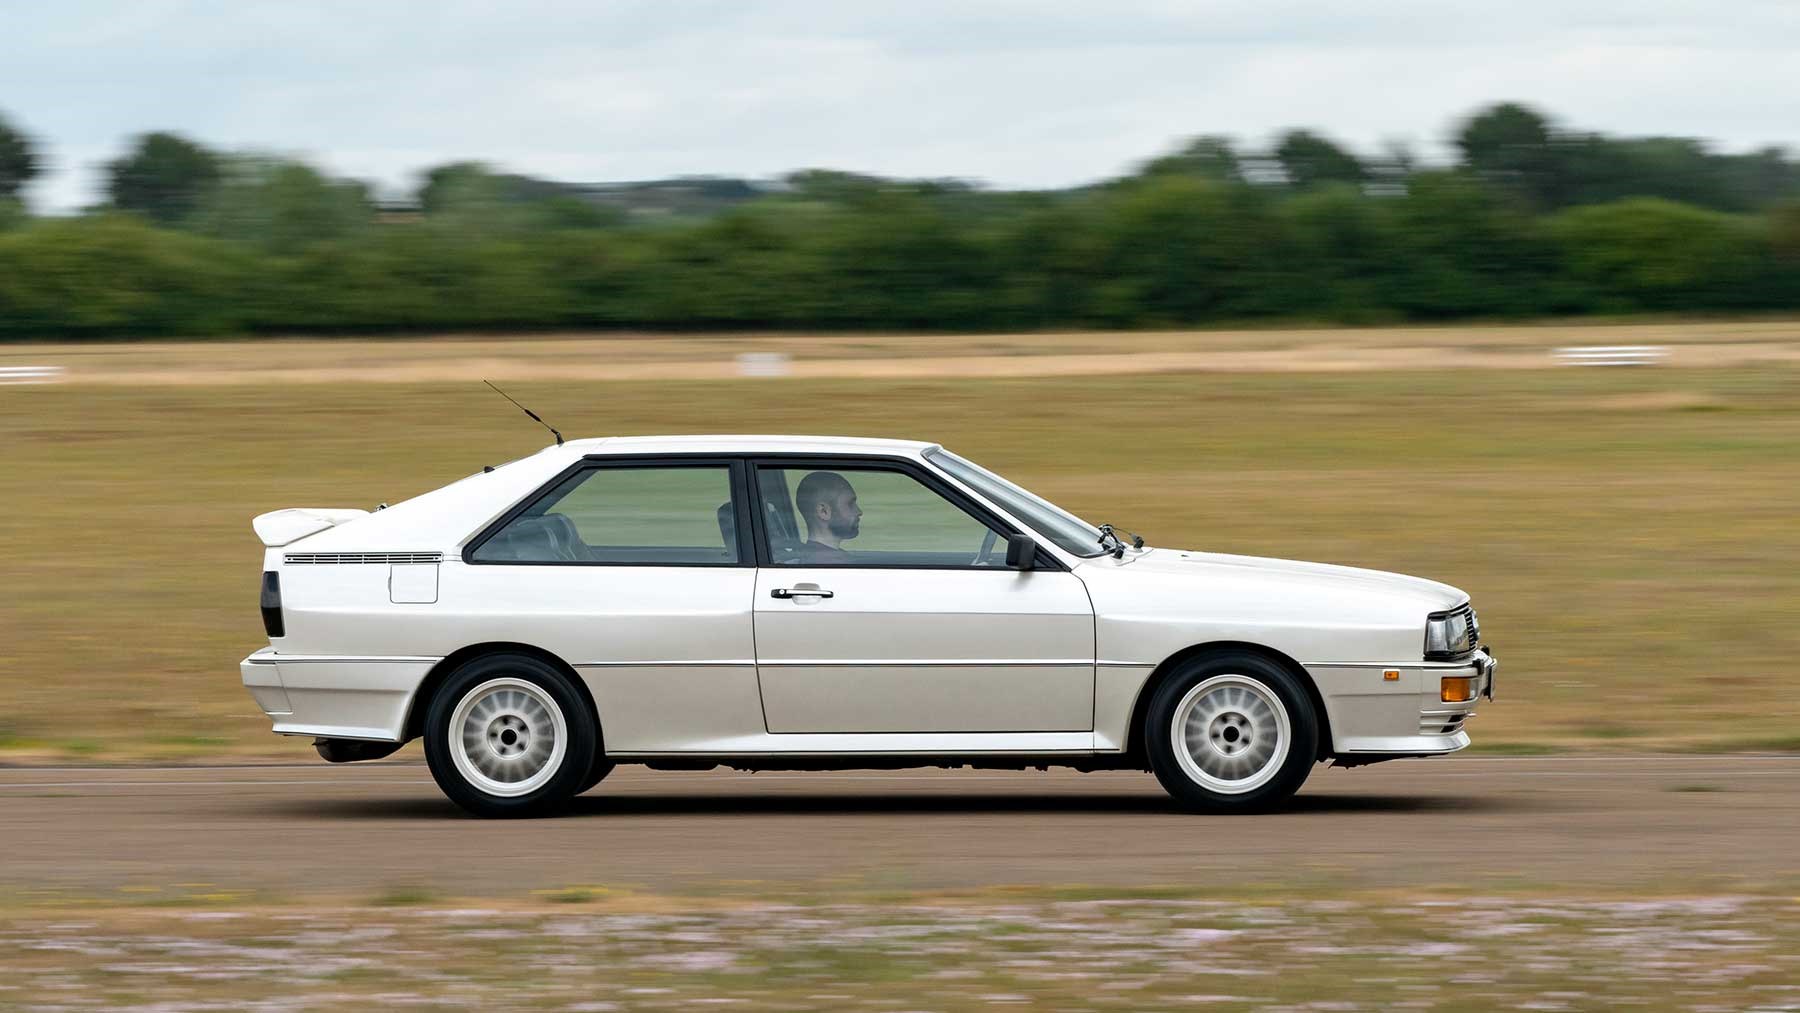 This car is a 1989 20v Quattro from Audi UK heritage fleet